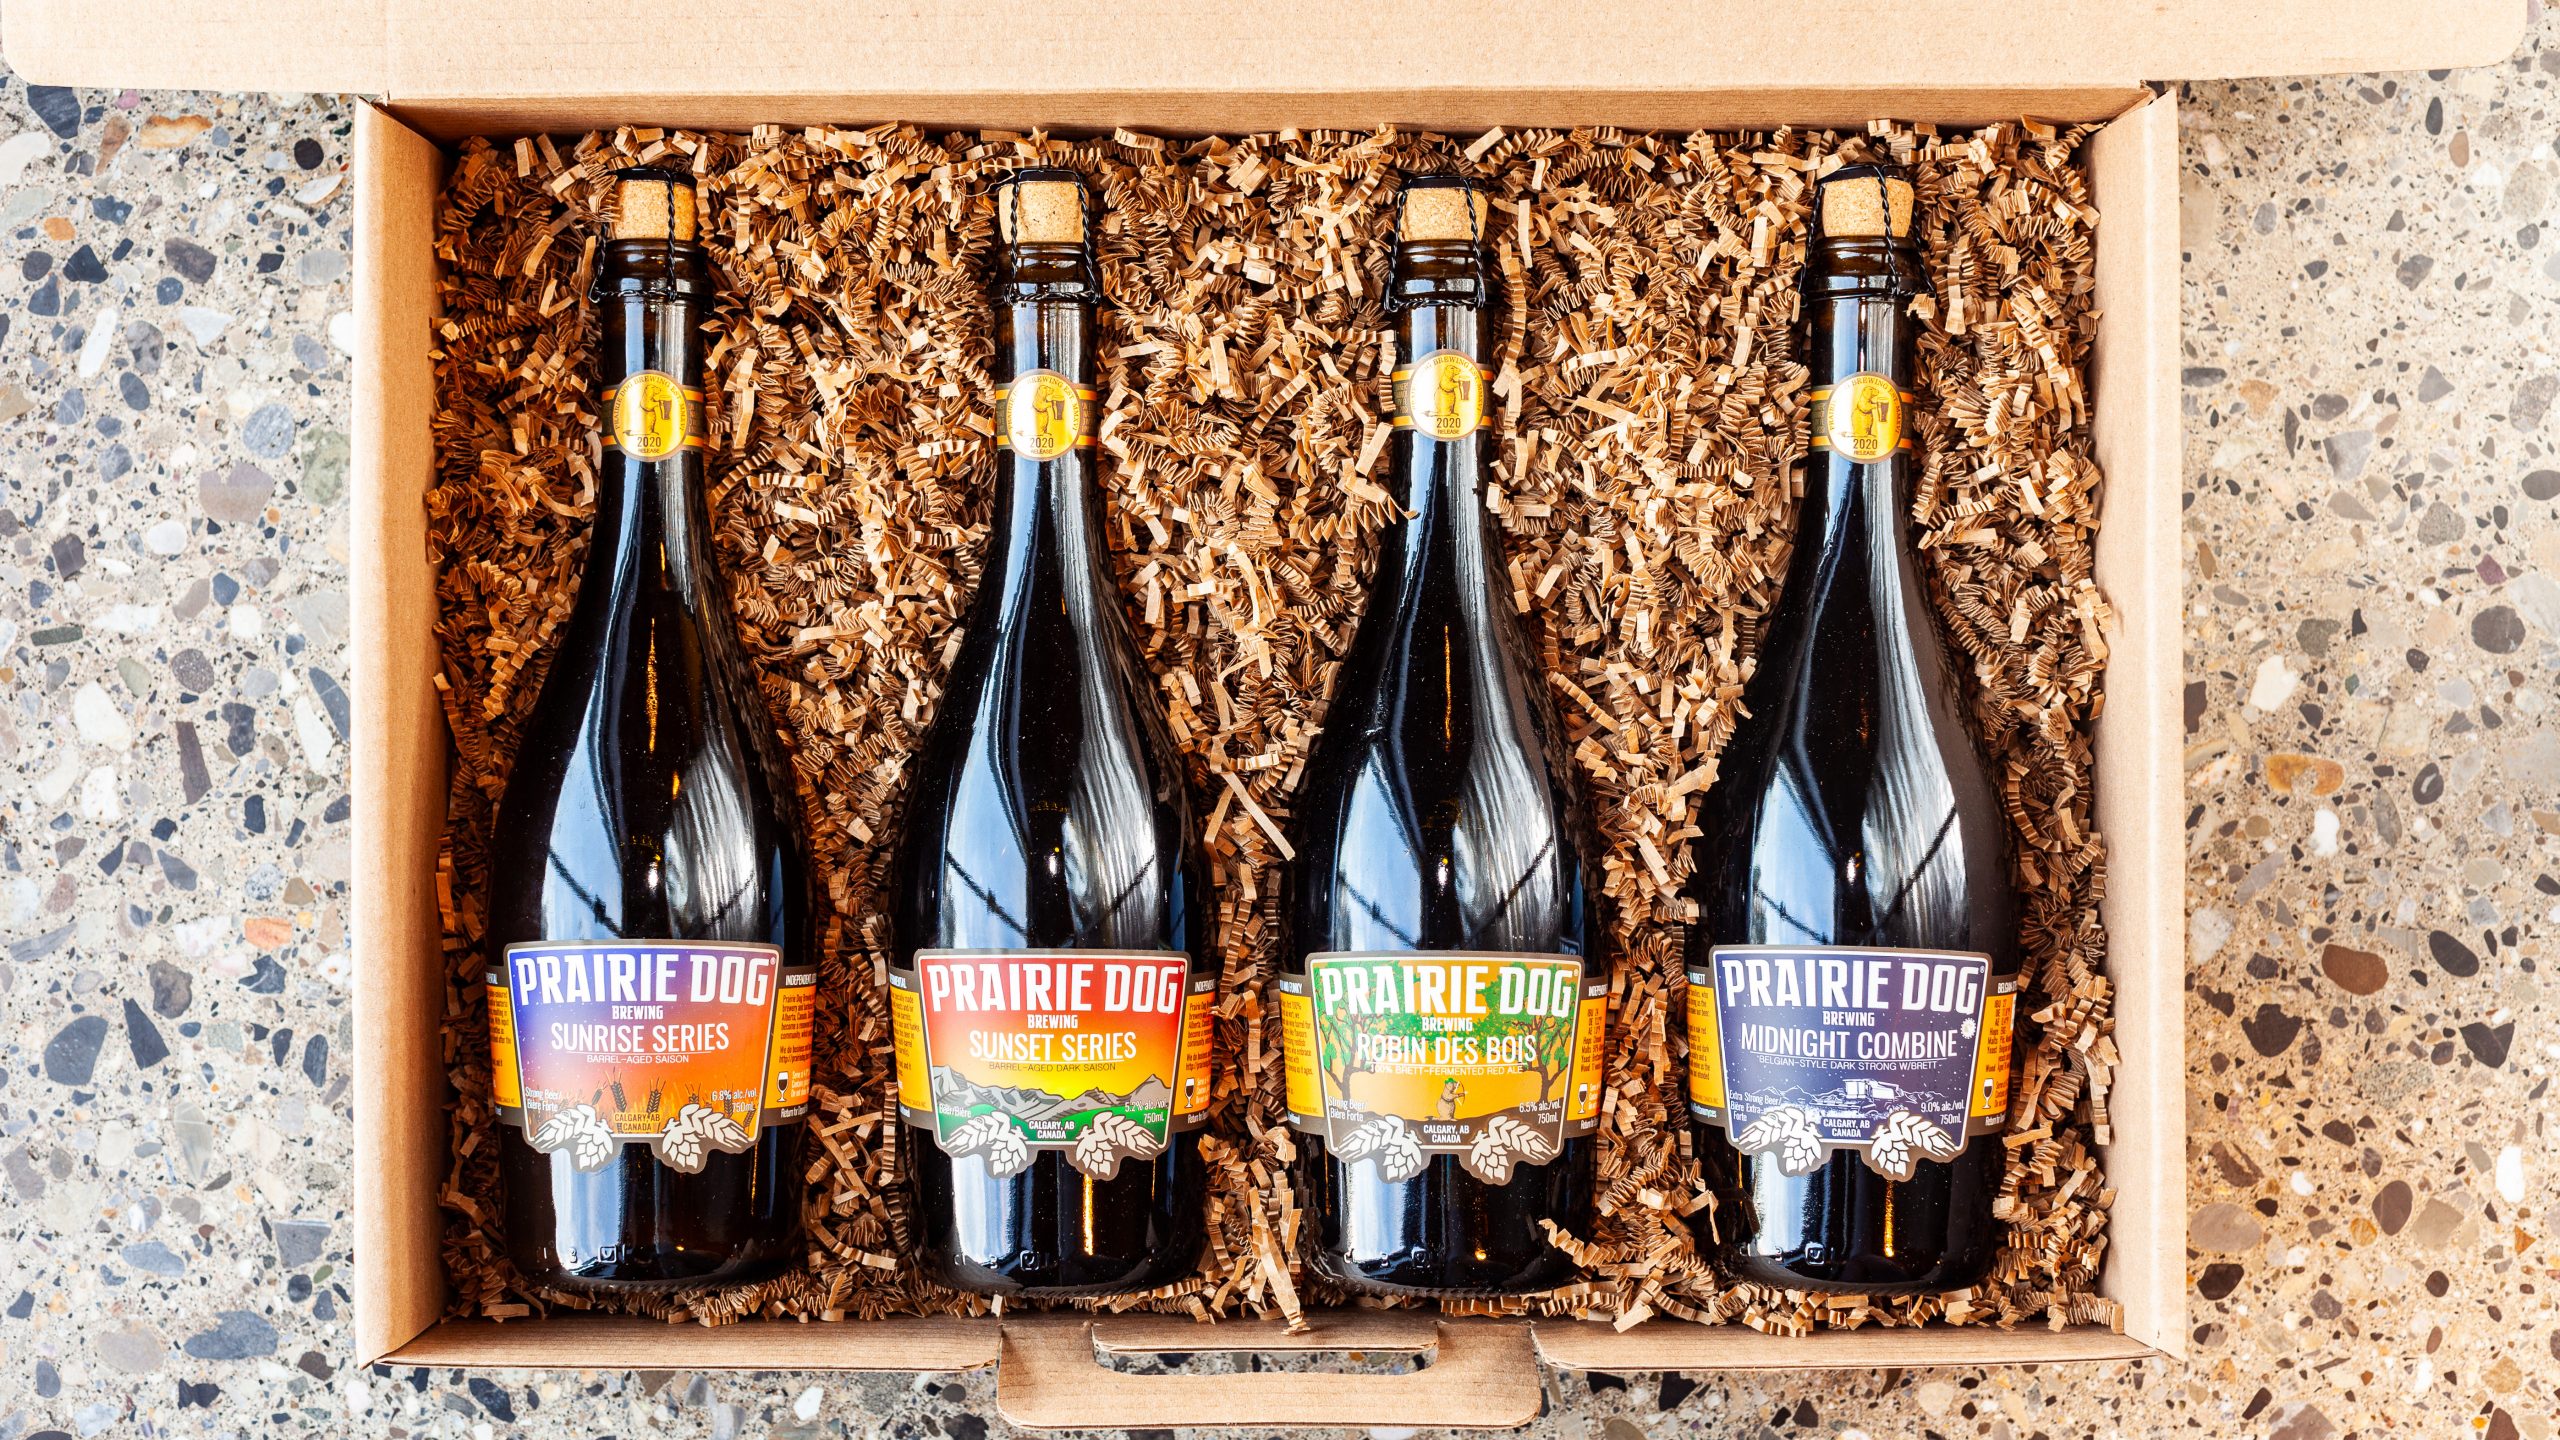 Prairie Dog Brewing For the Love of Bottles Holiday Gift Box Set, with our Sunrise and Sunset Series barrel-aged saisons, our Robin des Bois barrel-aged brett-fermented red ale, and our premiere 2020 release of Midnight Combine, a barrel-aged Belgian-style strong dark ale.